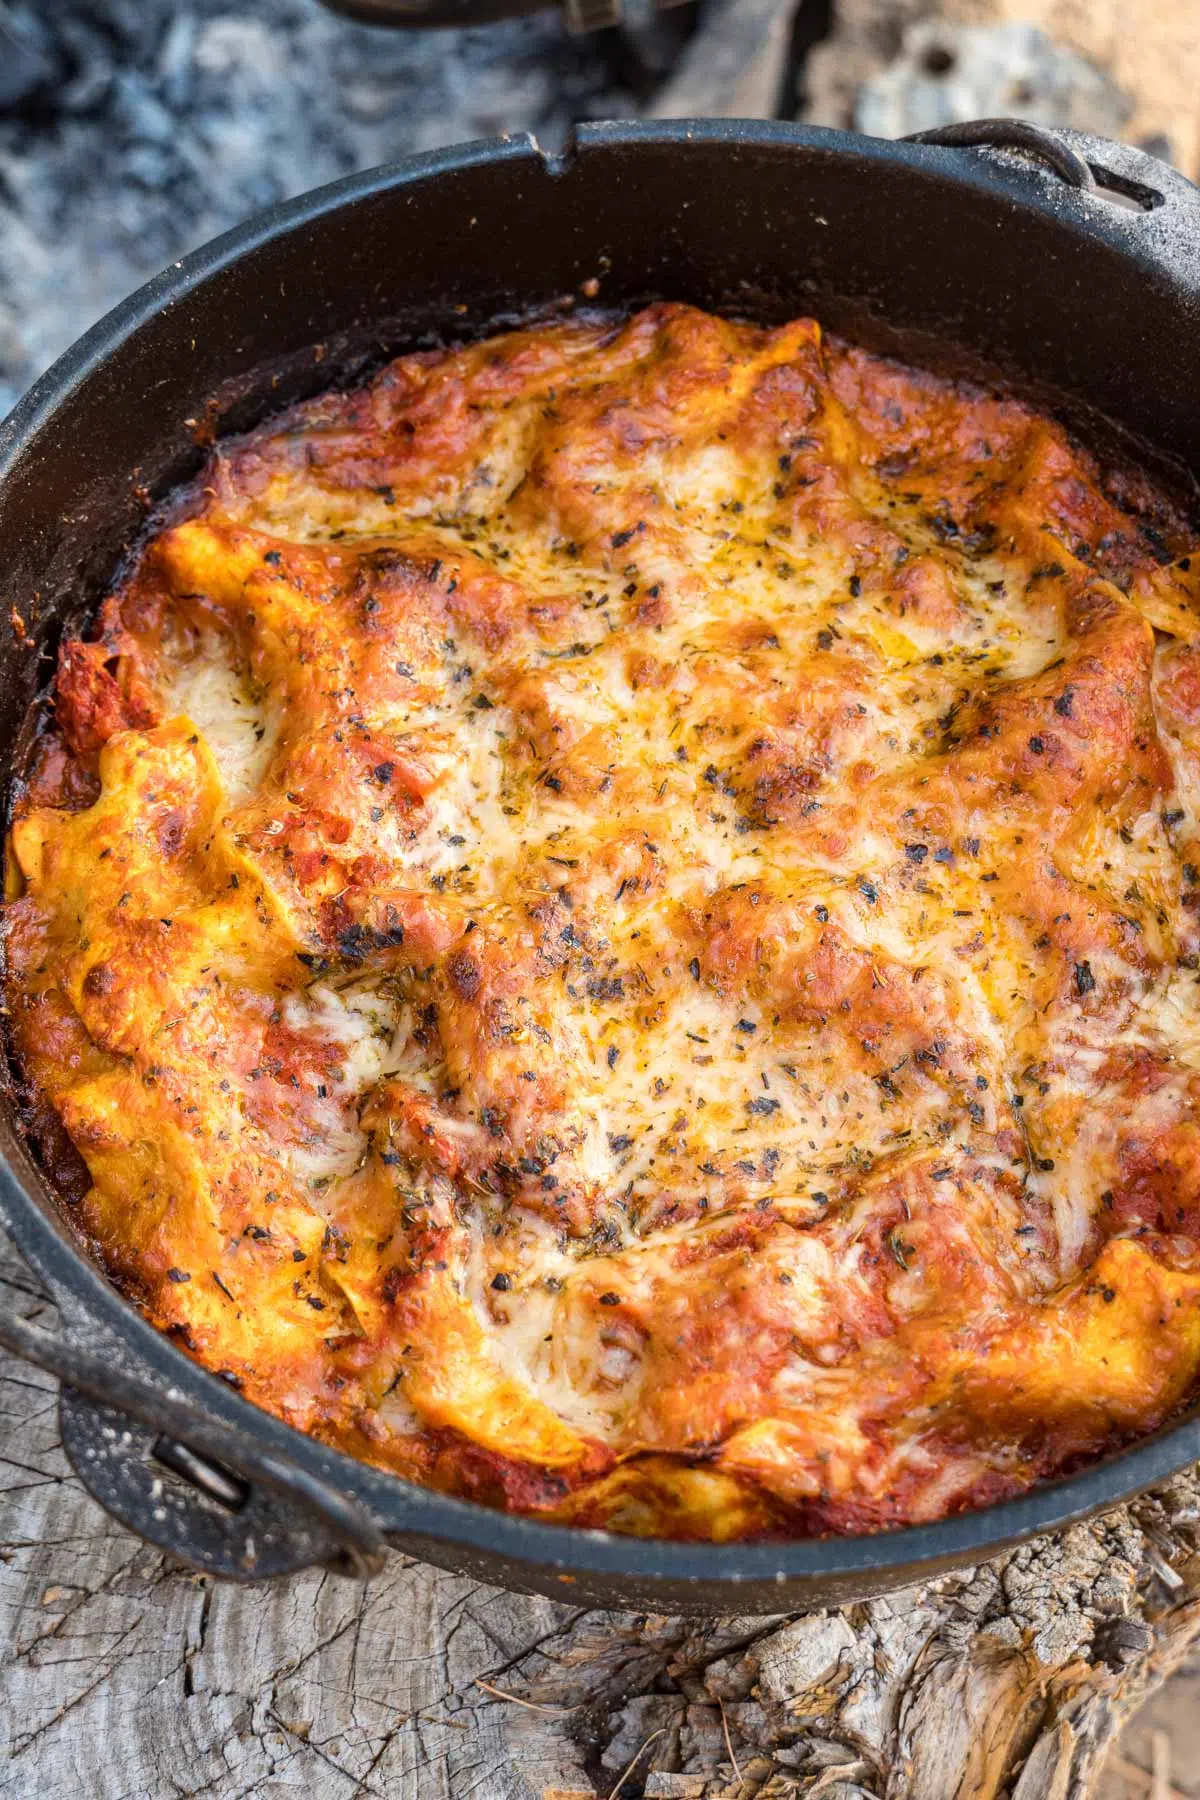 The Best Pasta Pot Is Actually a Dutch Oven